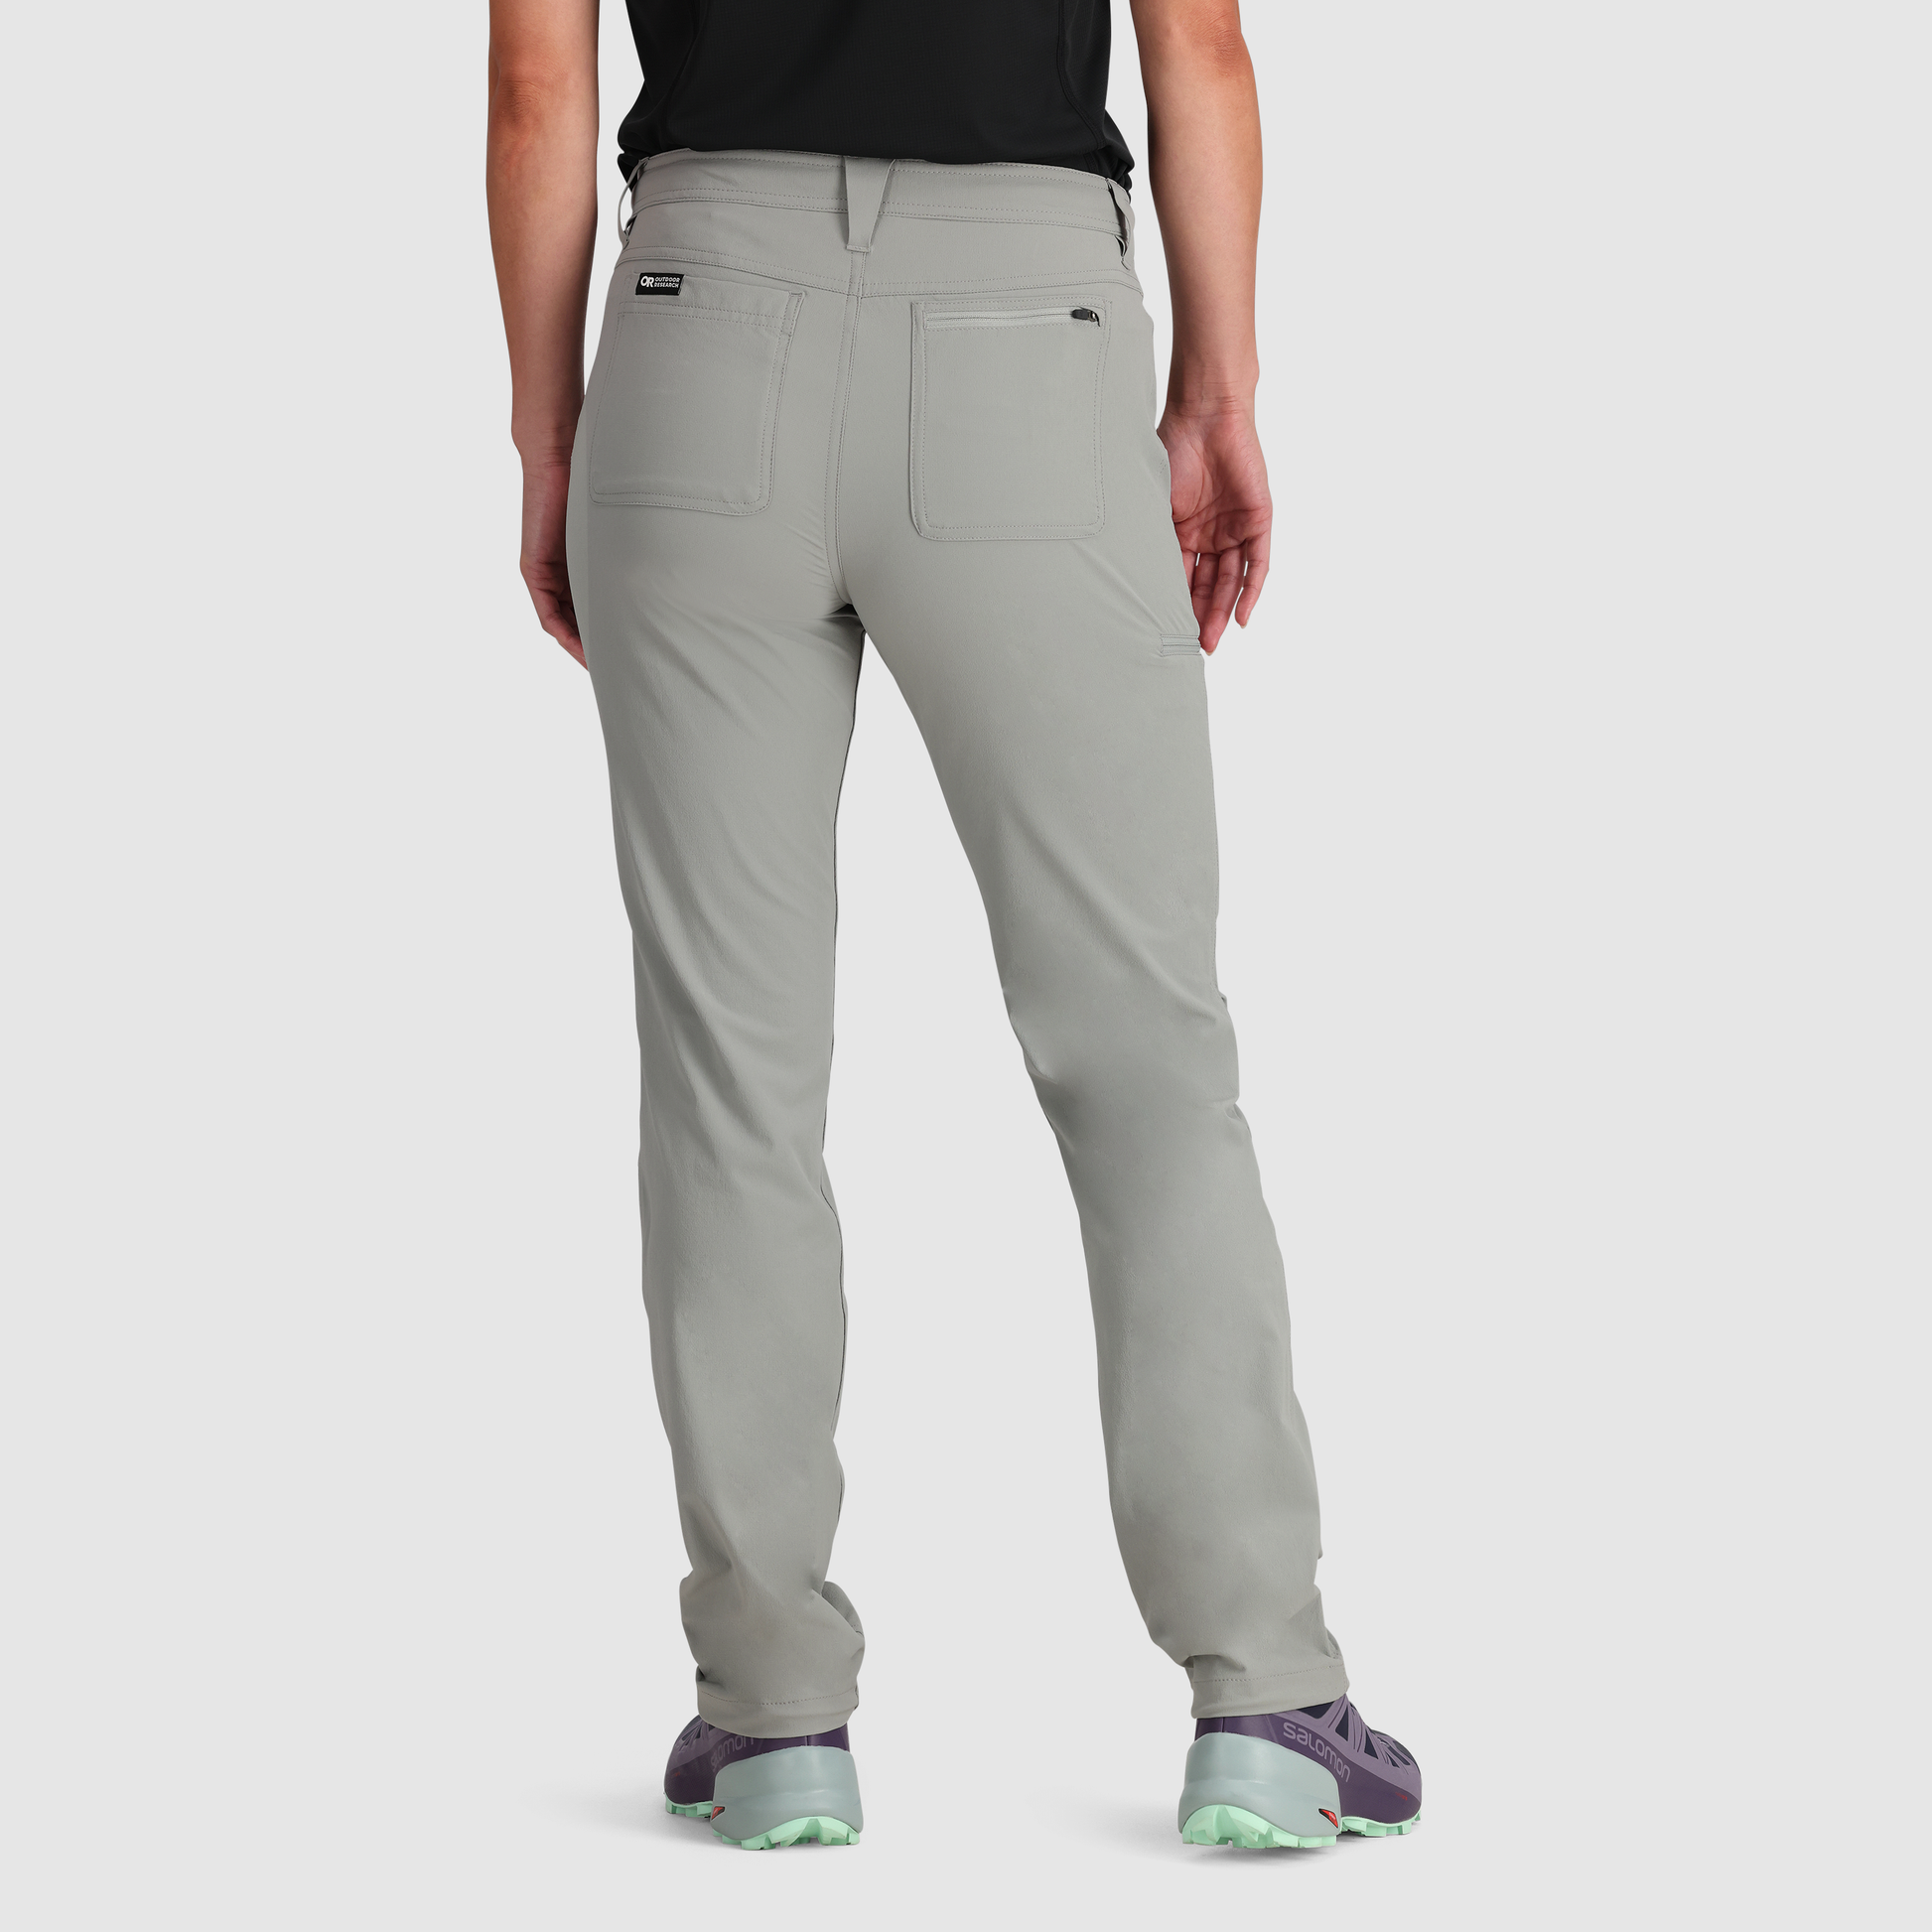 Patagonia trousers, perfect for climbing and trekking from outdoor